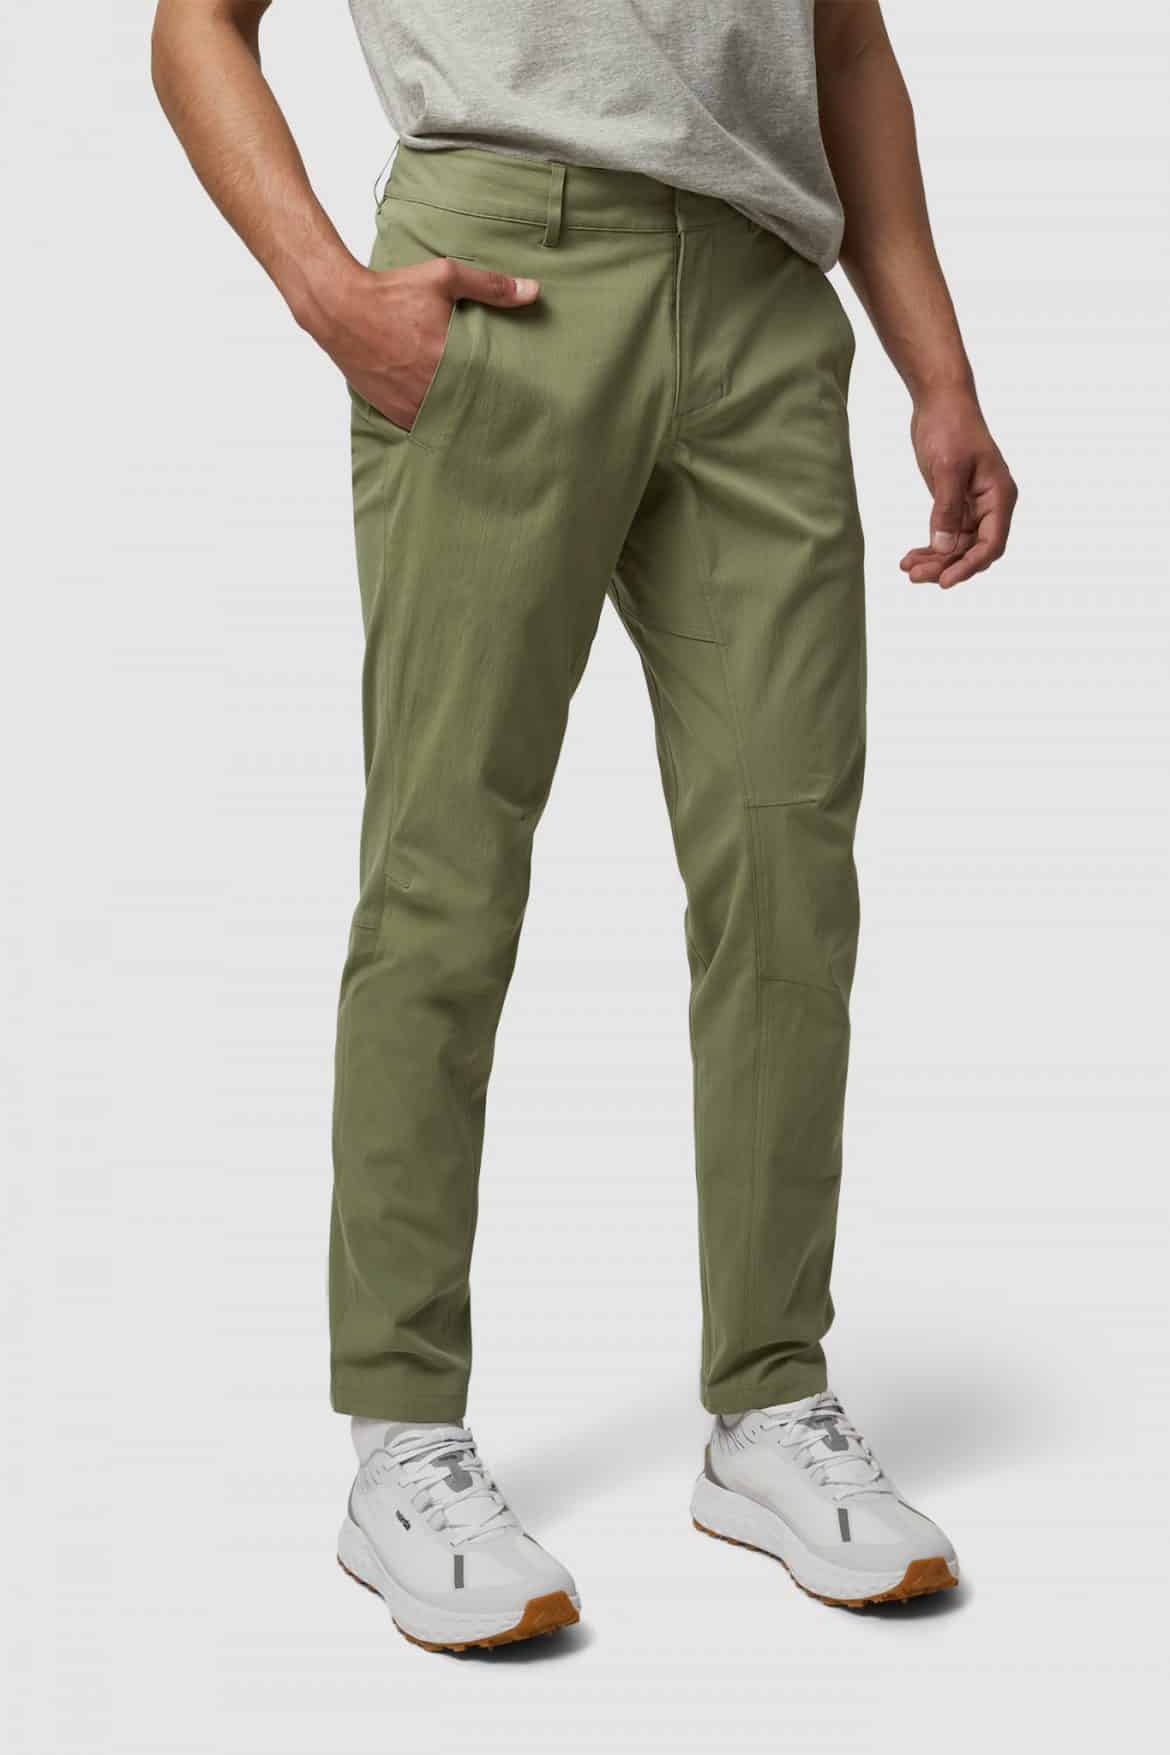 Vallier Leknes Articulated Pants Are Functional and Smart